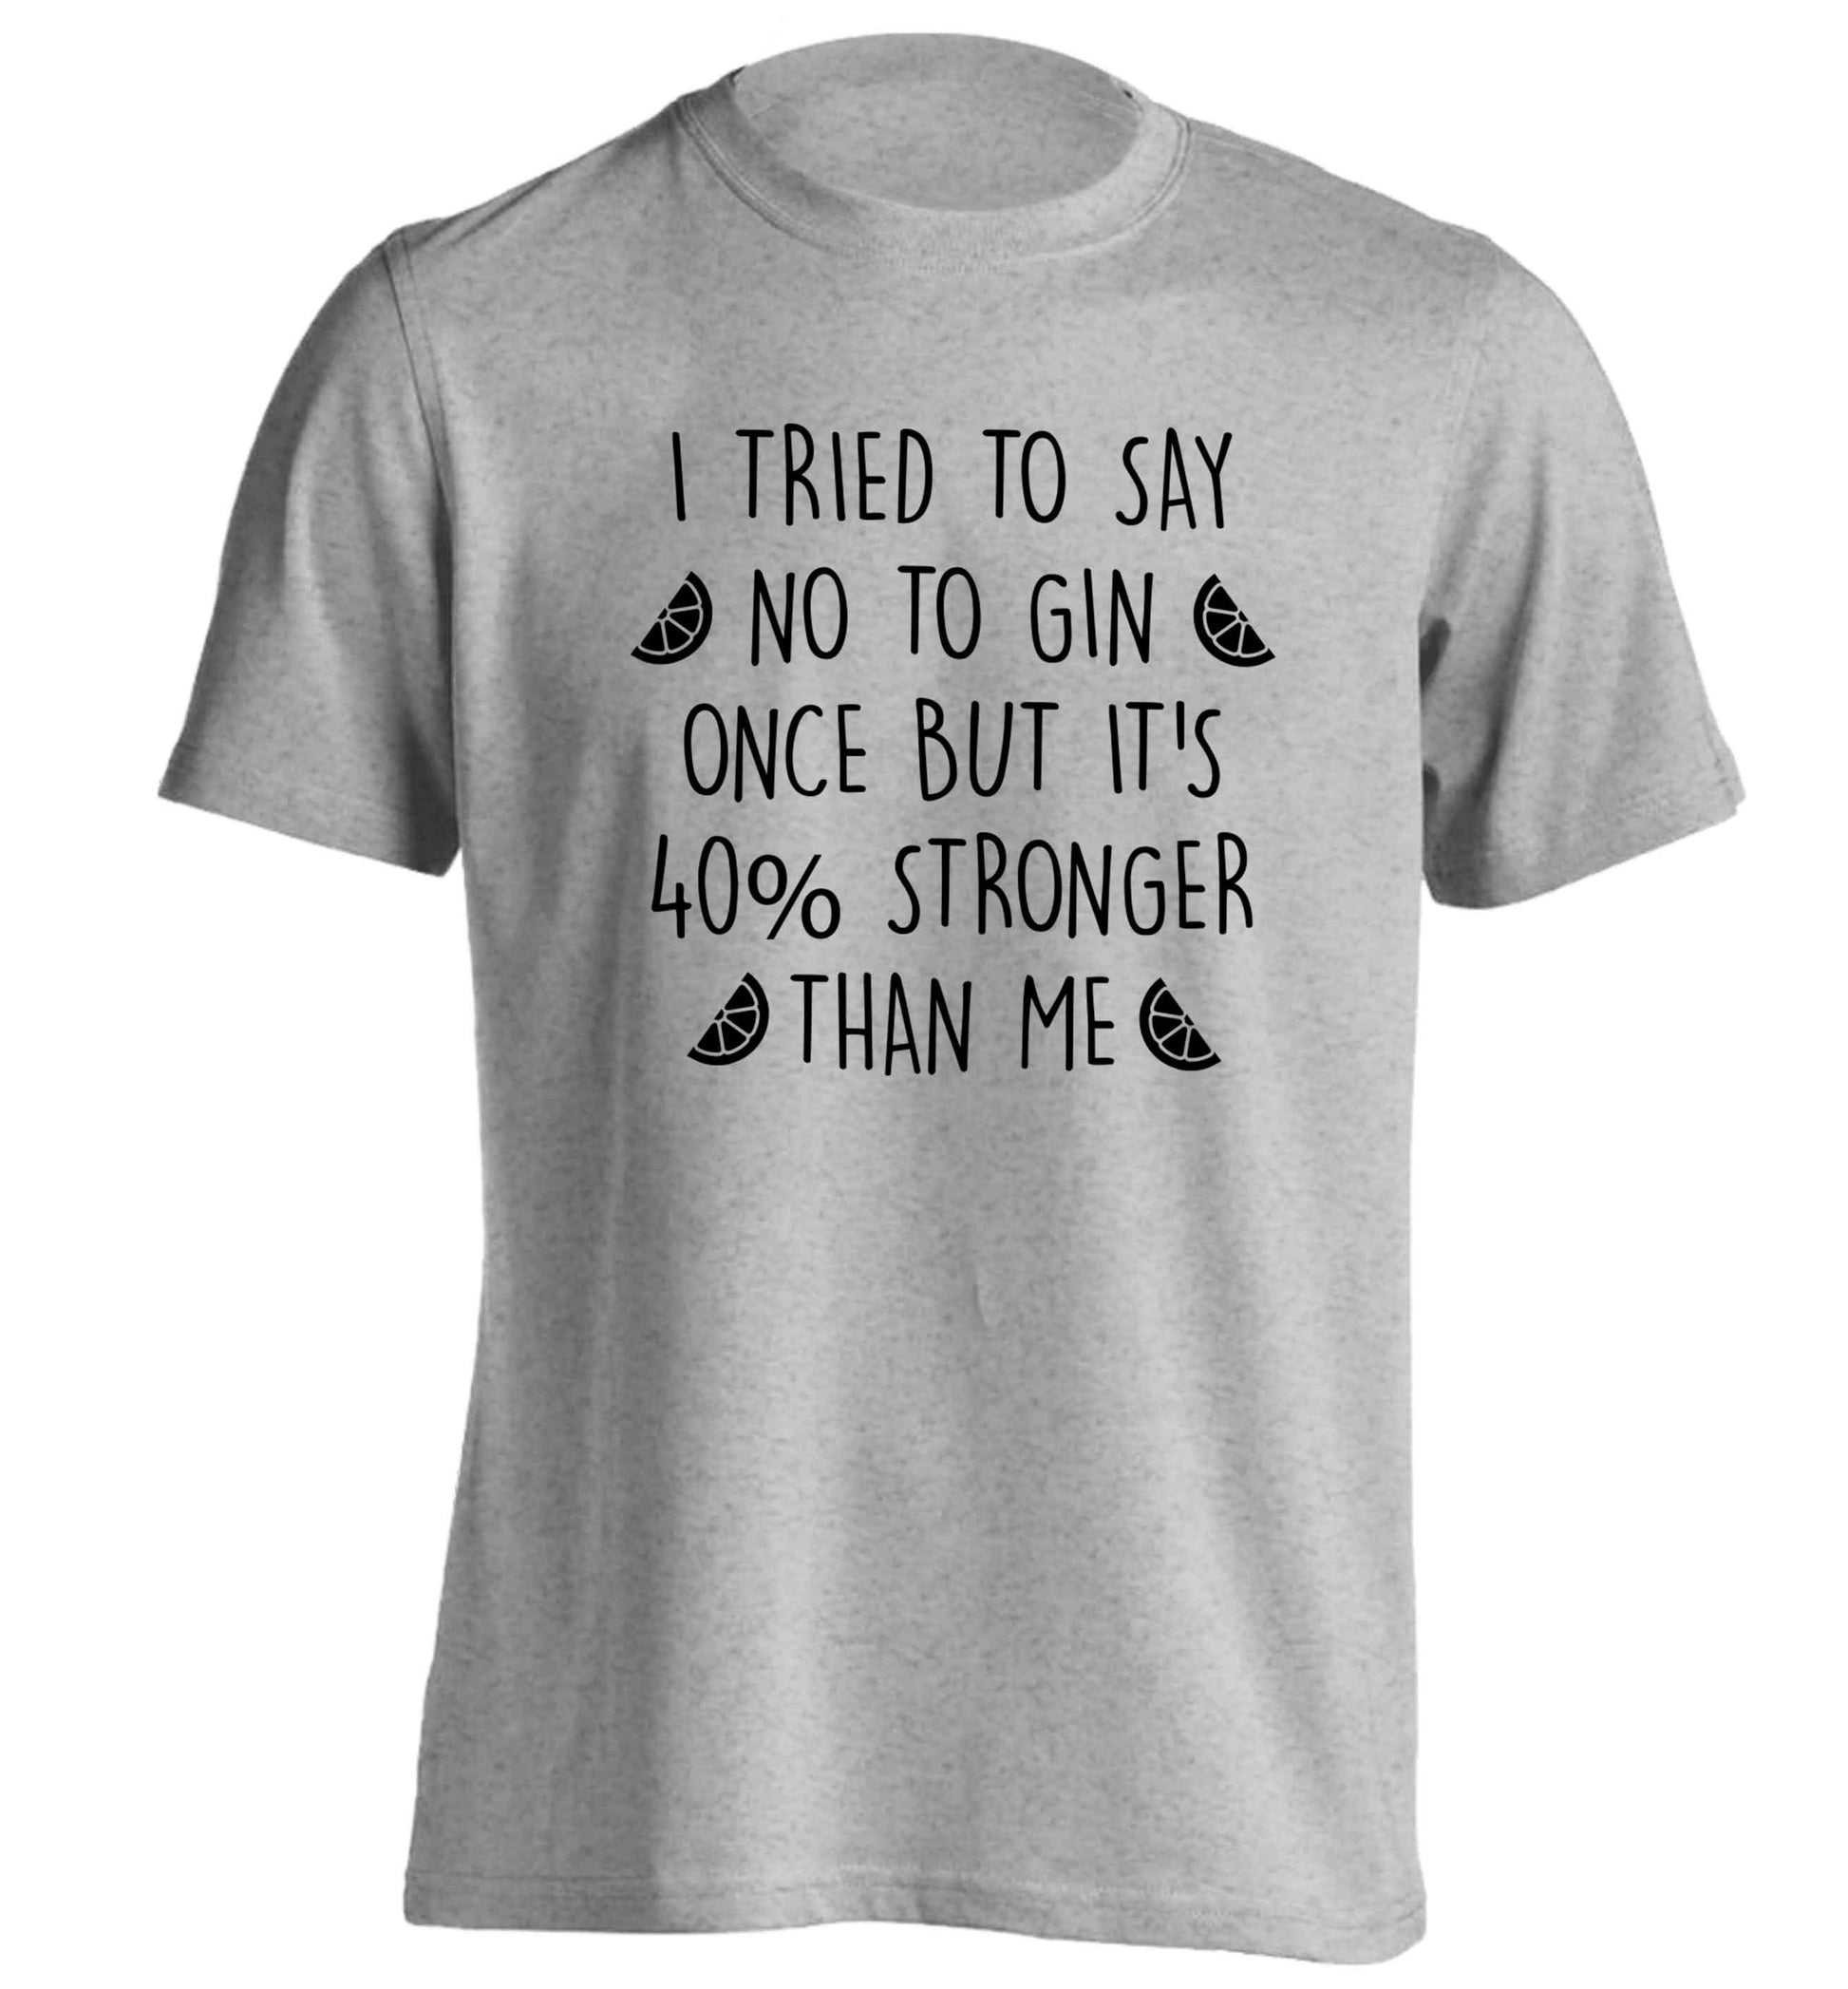 I tried to say no to gin once but it's 40% stronger than me adults unisex grey Tshirt 2XL